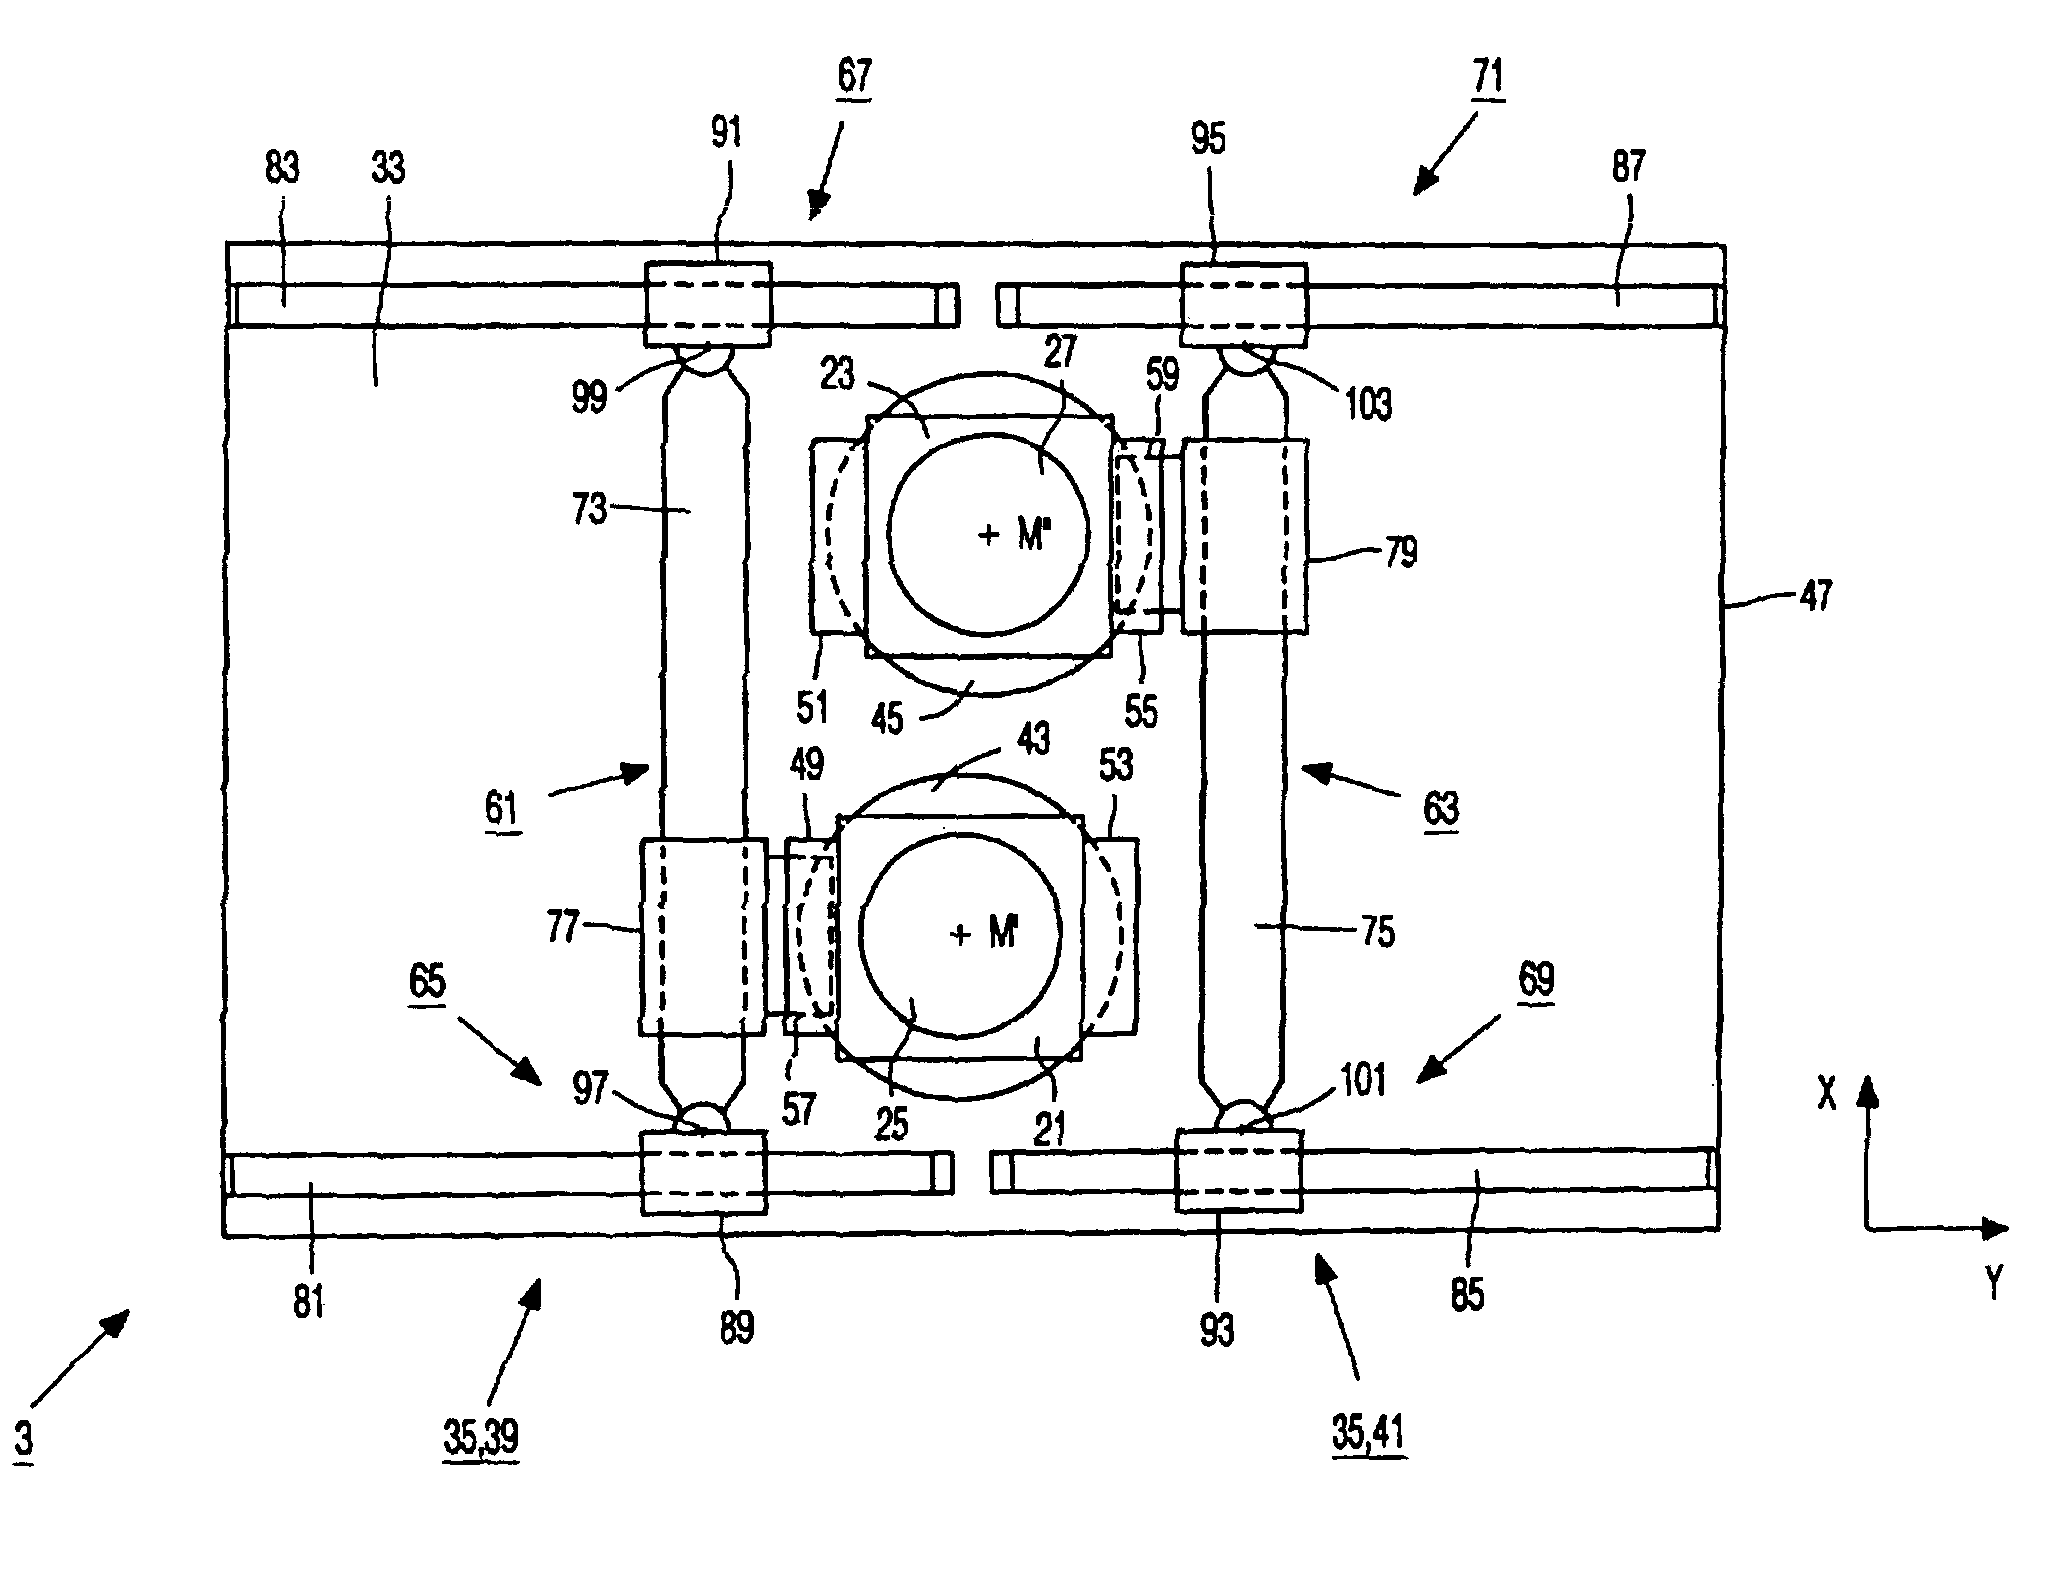 Positioning device having two object holders